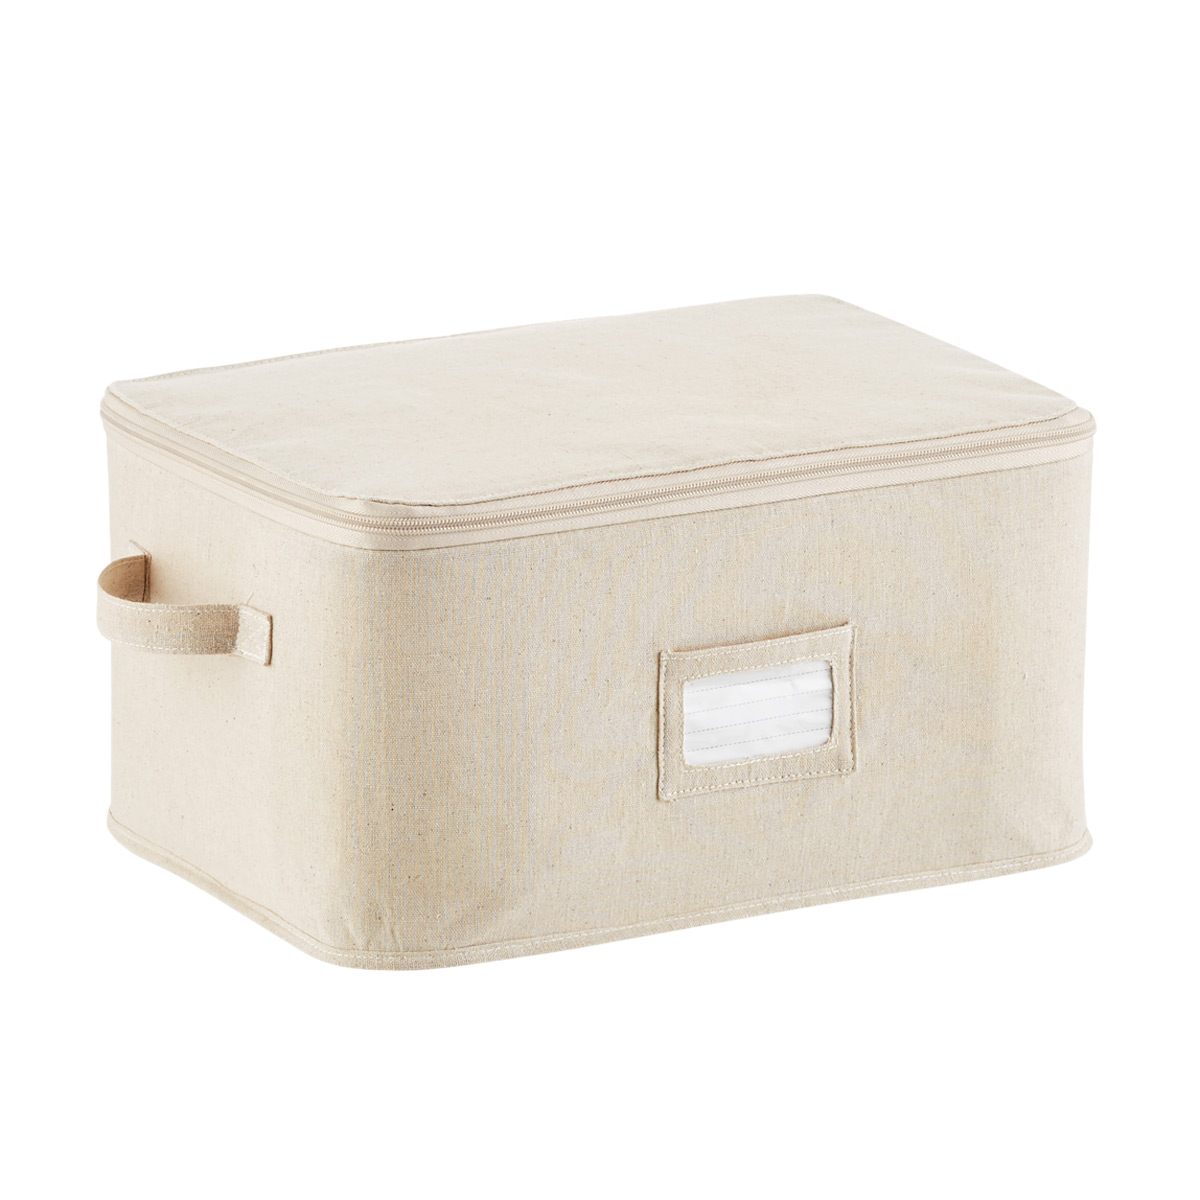 https://www.containerstore.com/catalogimages/471328/10079379-storage-bag-small-natural.jpg